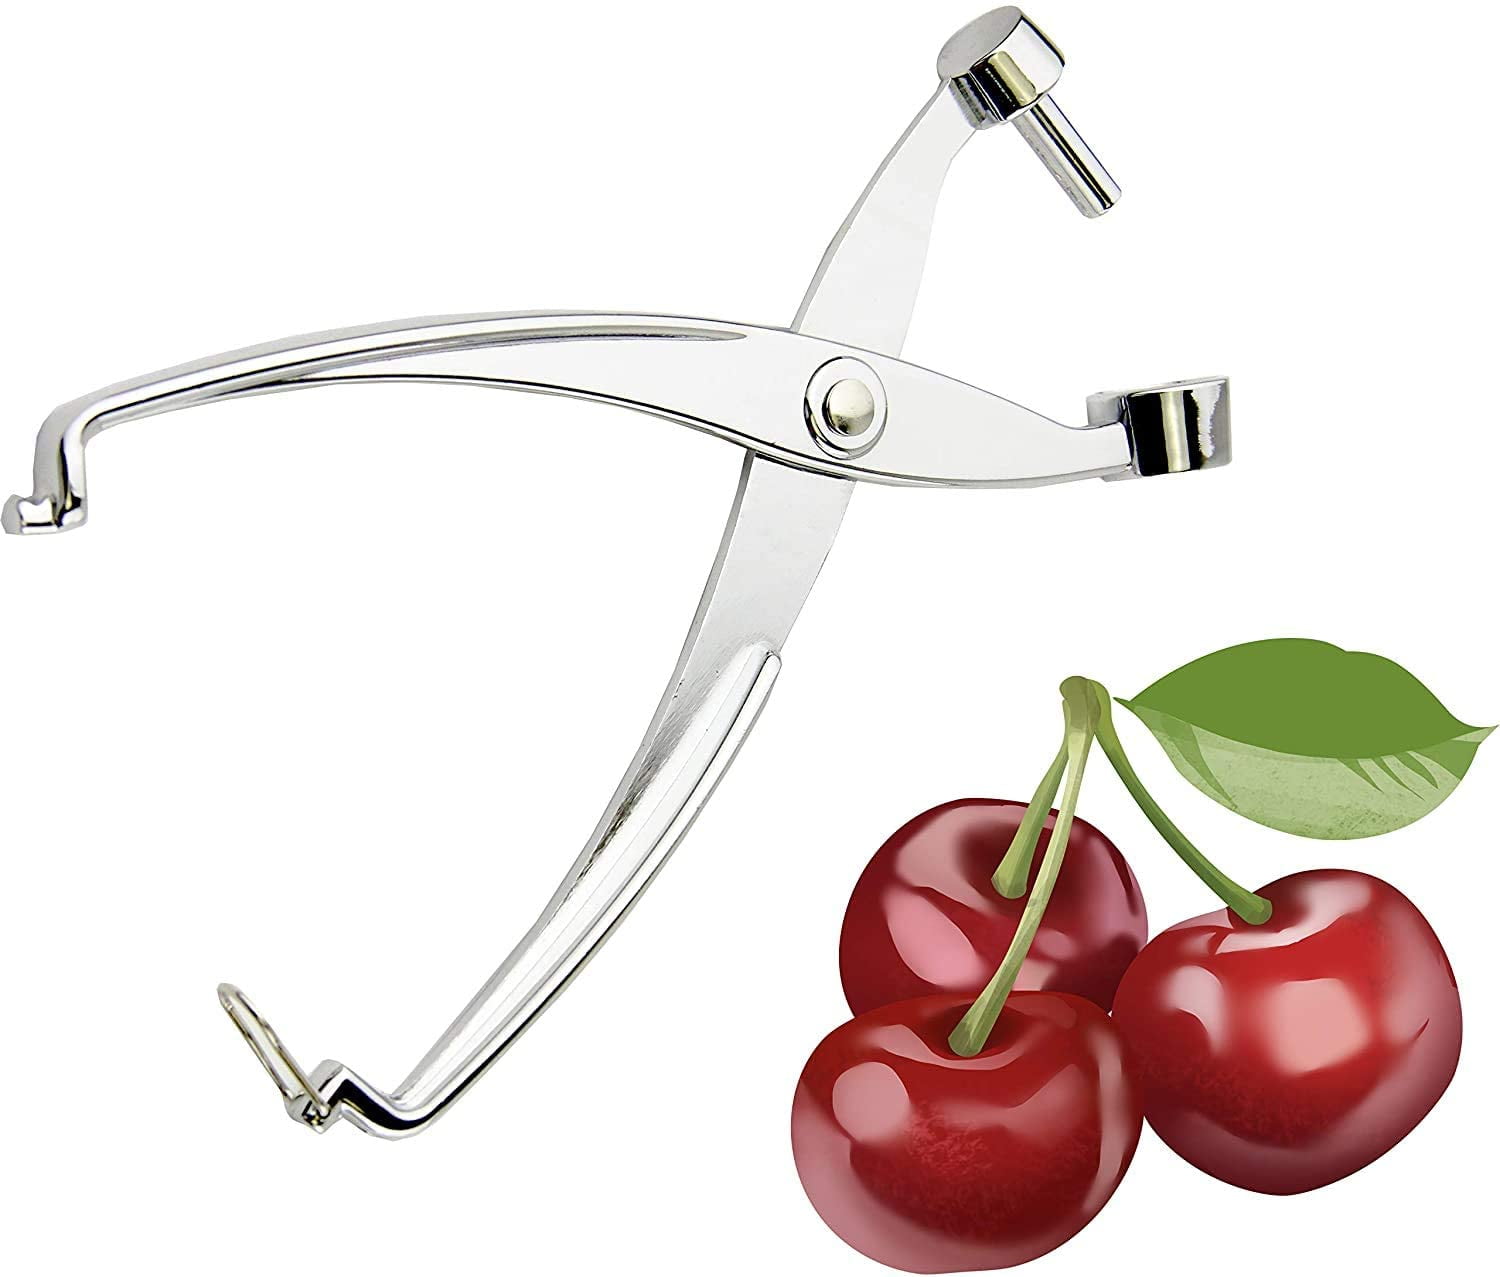 Heavy Duty Olive Pitter Tool Cherry Pitter Tool Portable Cherry Pitter Tool Kitchen aid with Space-Saving Lock Design Black 